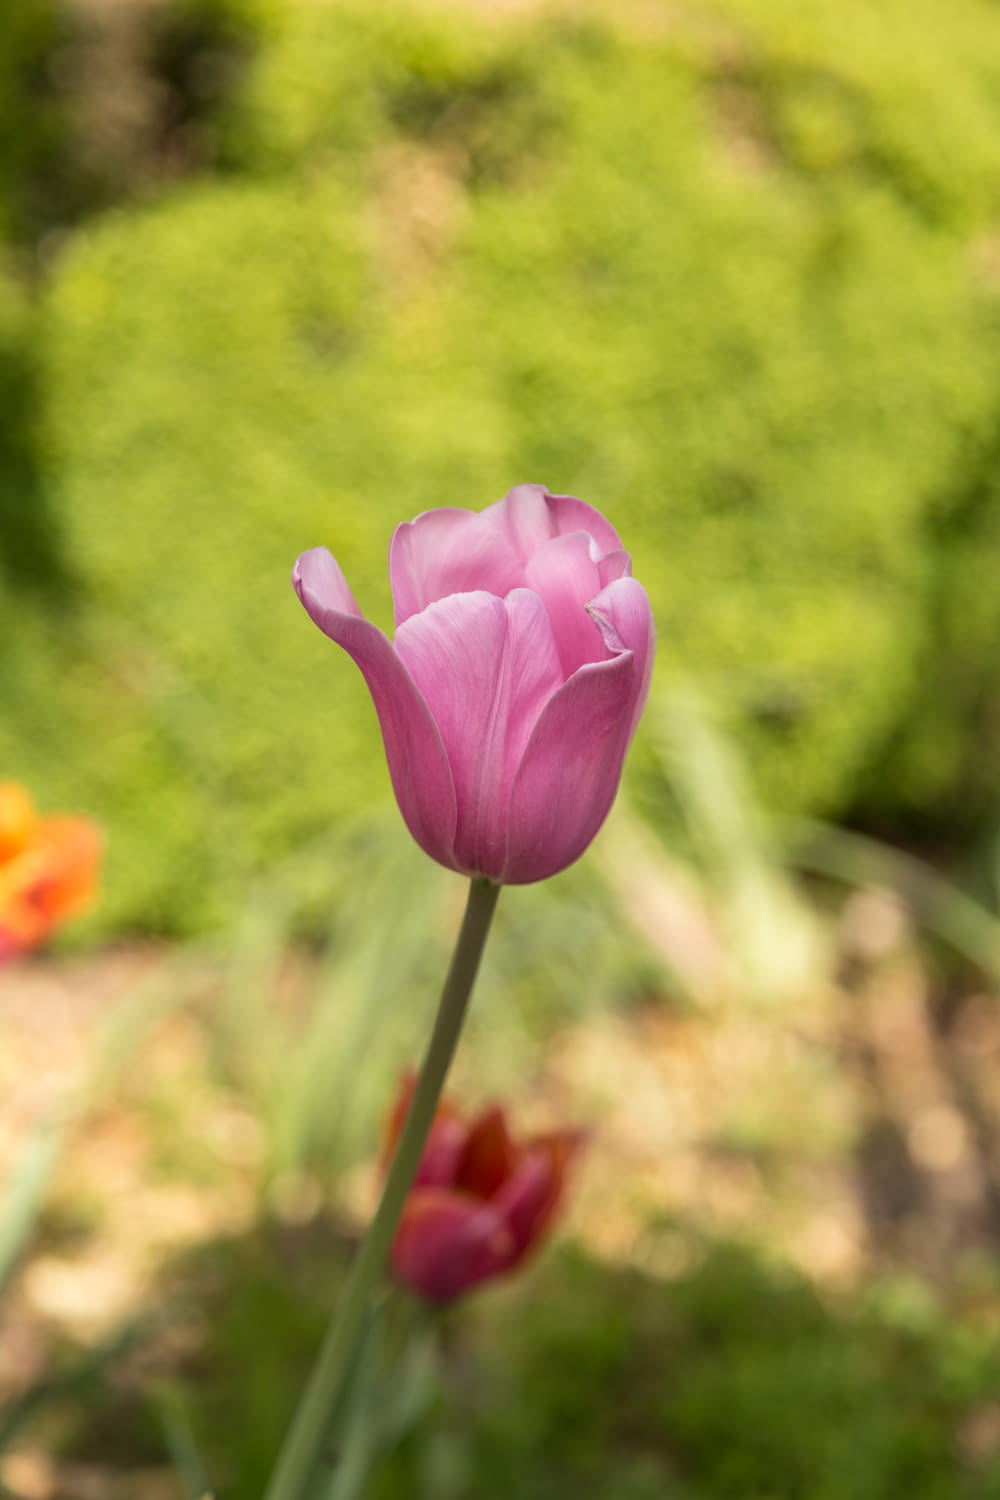 a single pink tulip in a garden with other tulips